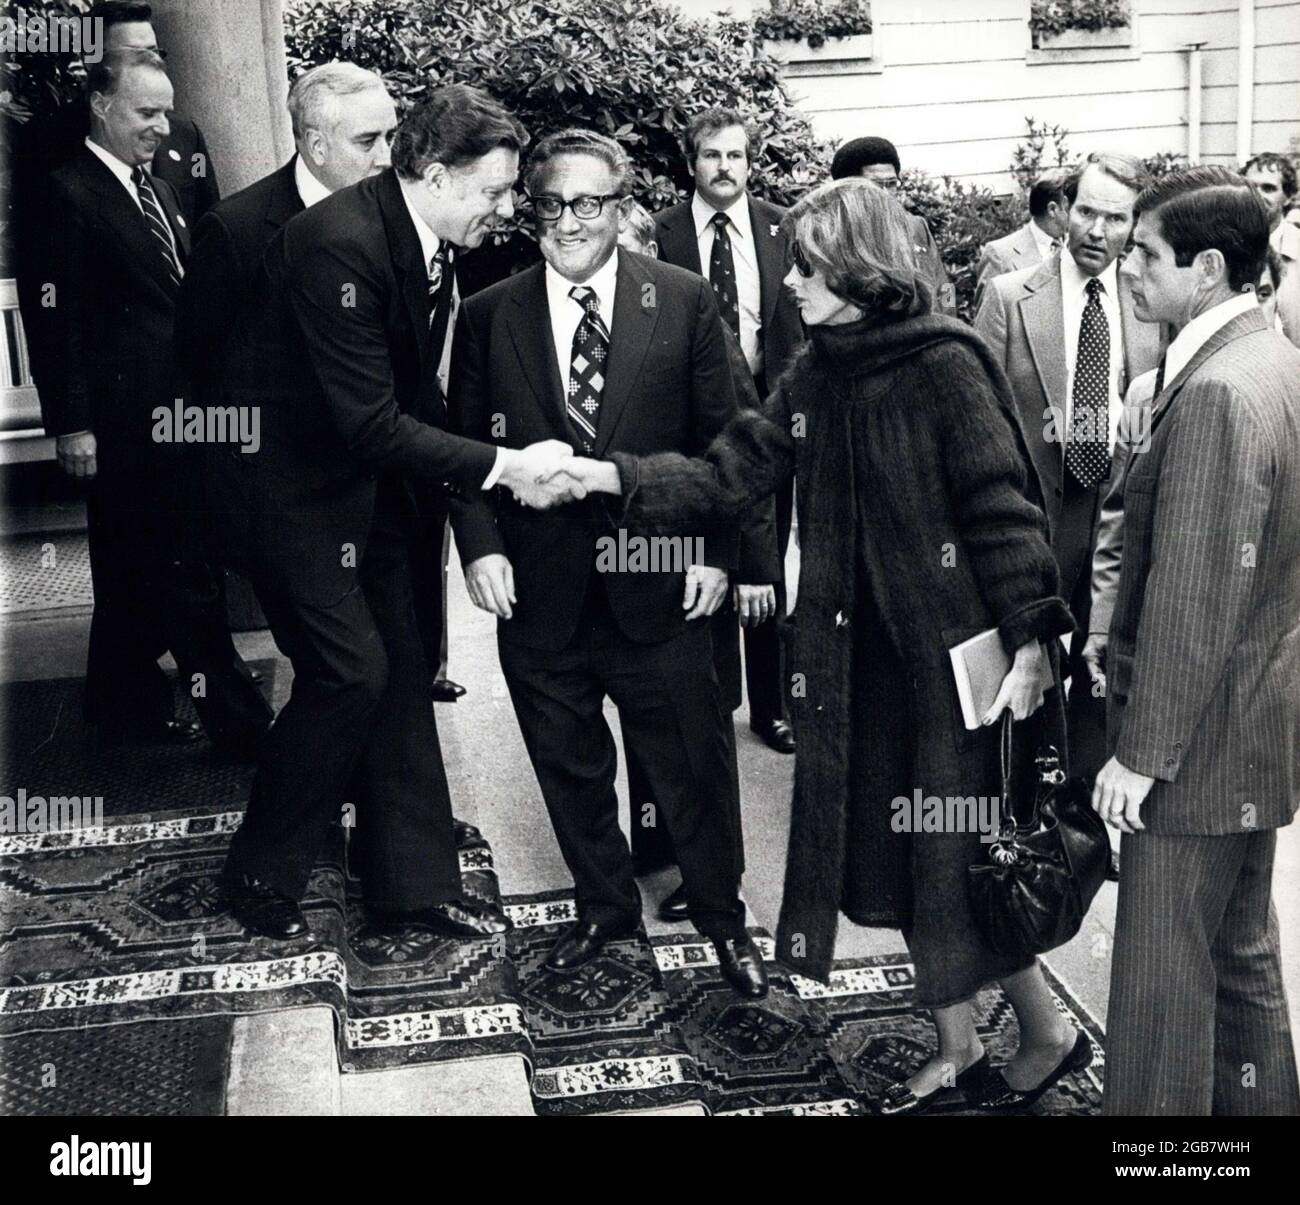 Zurich, Switzerland. 05th Sep, 1976. The arrival of the American delegation at the Zurich ''Grand Hotel Dolder'' Saturday afternoon with the hotel managers greeting Mr. HENRY KISSINGER, center, and his wife, Mrs. NANCY KISSINGER, center right. Credit: Keystone Press Agency/ZUMA Wire/Alamy Live News Stock Photo